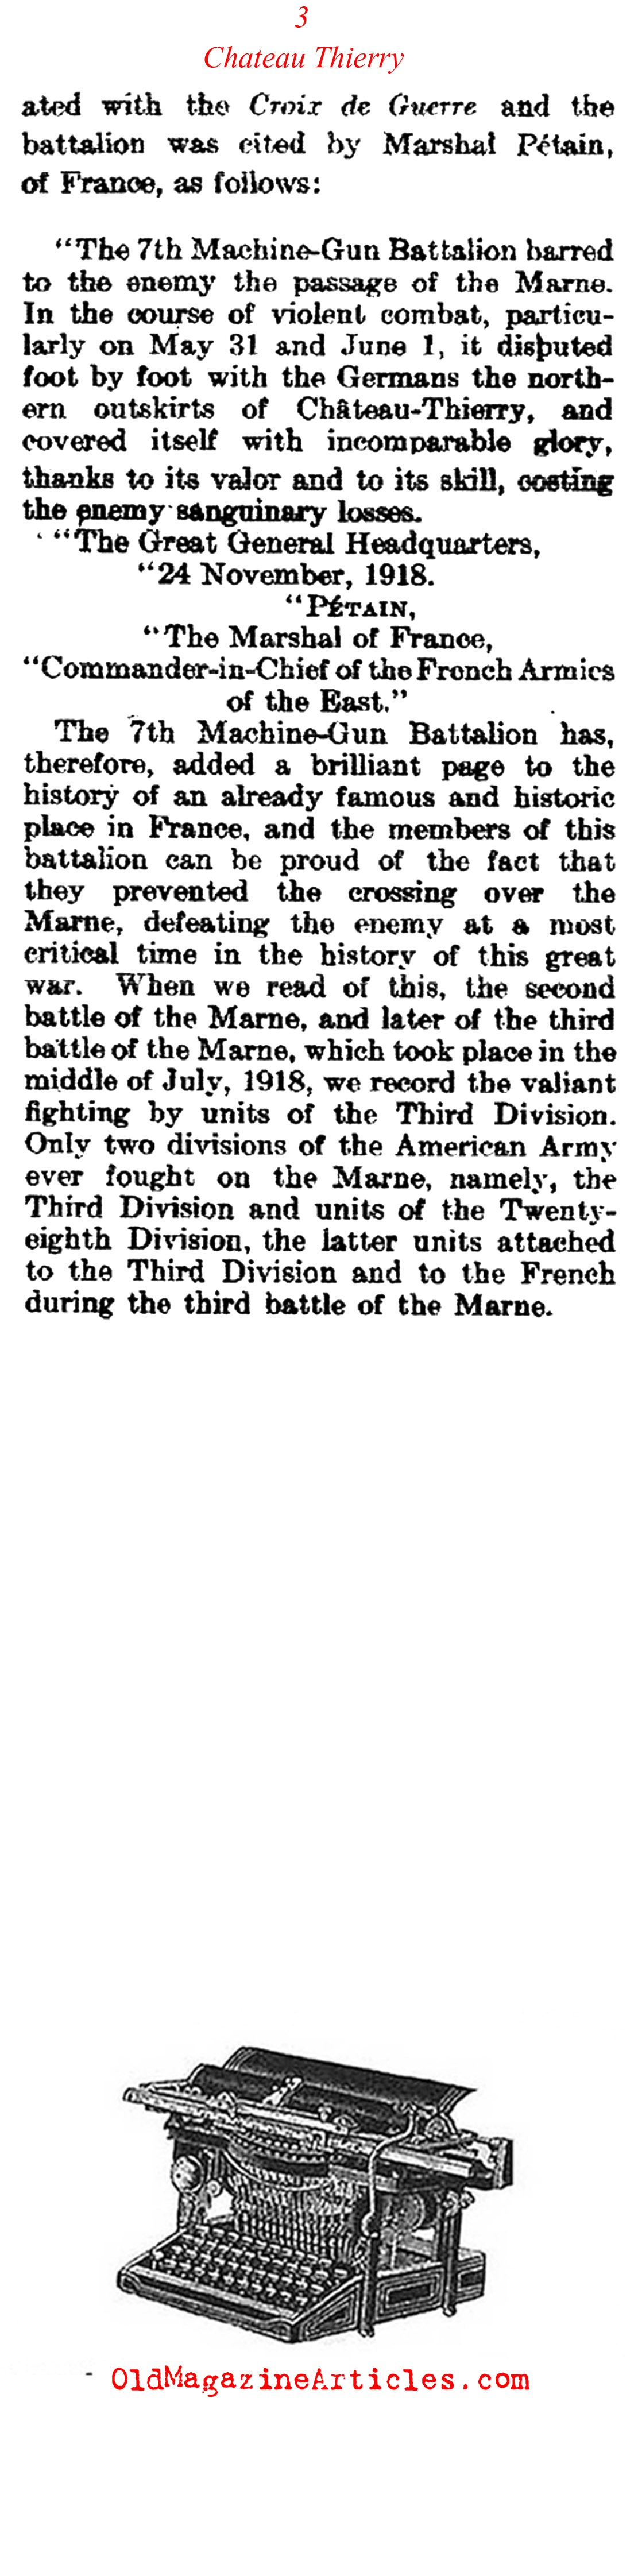 Chateau-Thierry: Setting the Record Straight   (The Literary Digest, 1919)